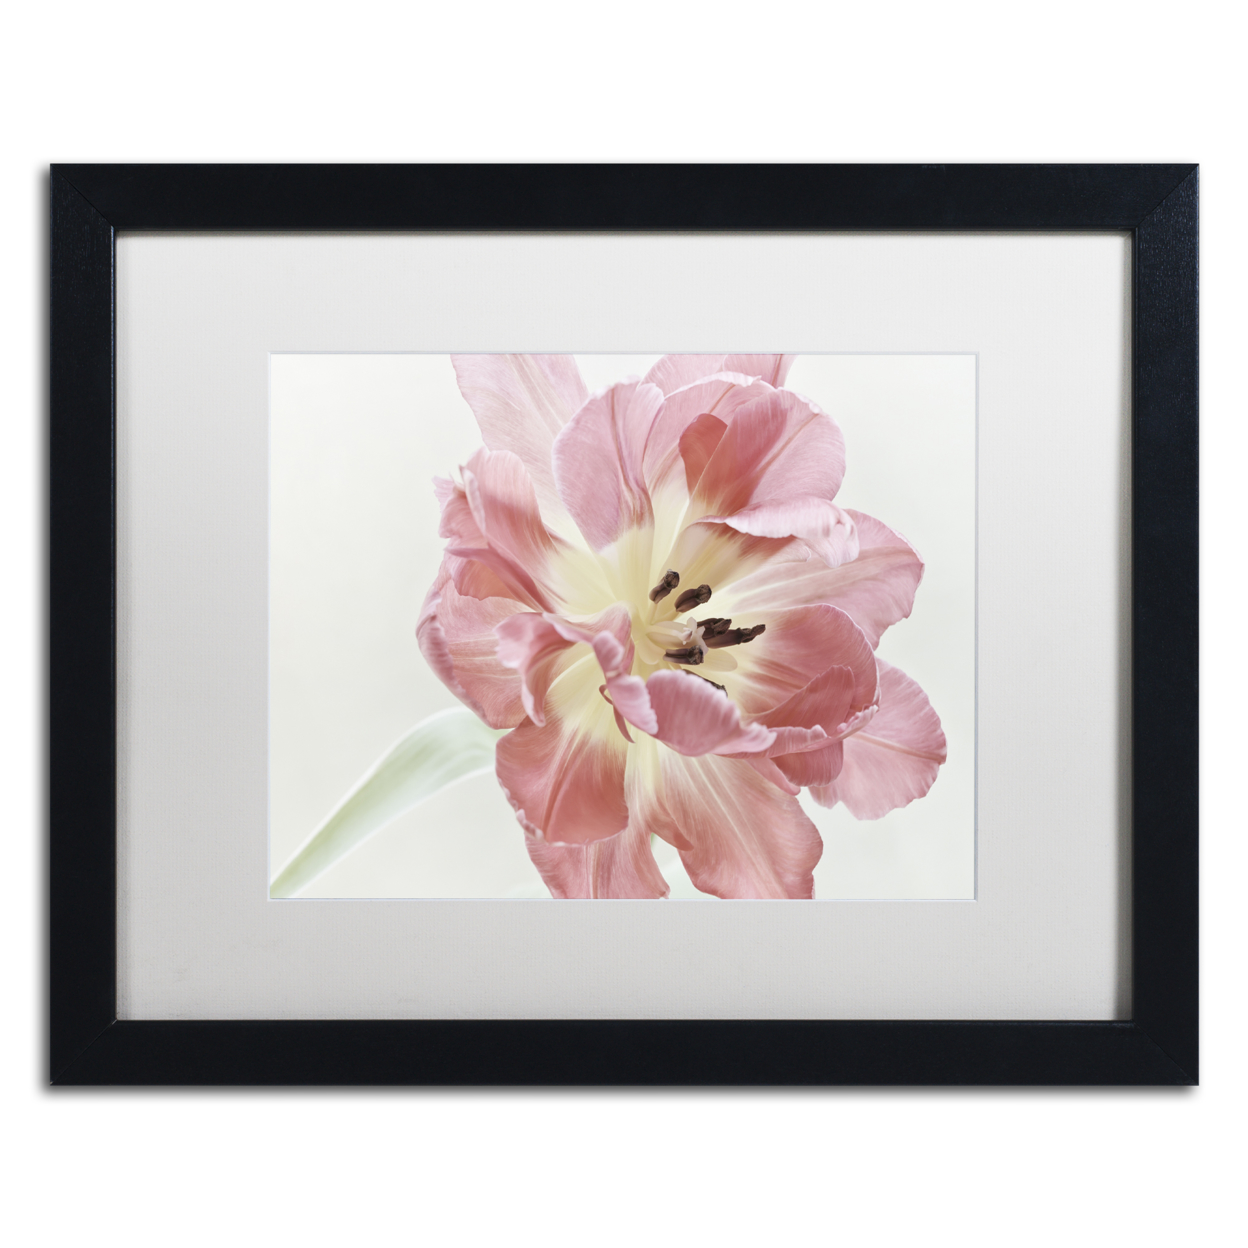 Cora Niele 'Red Tulip' Black Wooden Framed Art 18 X 22 Inches